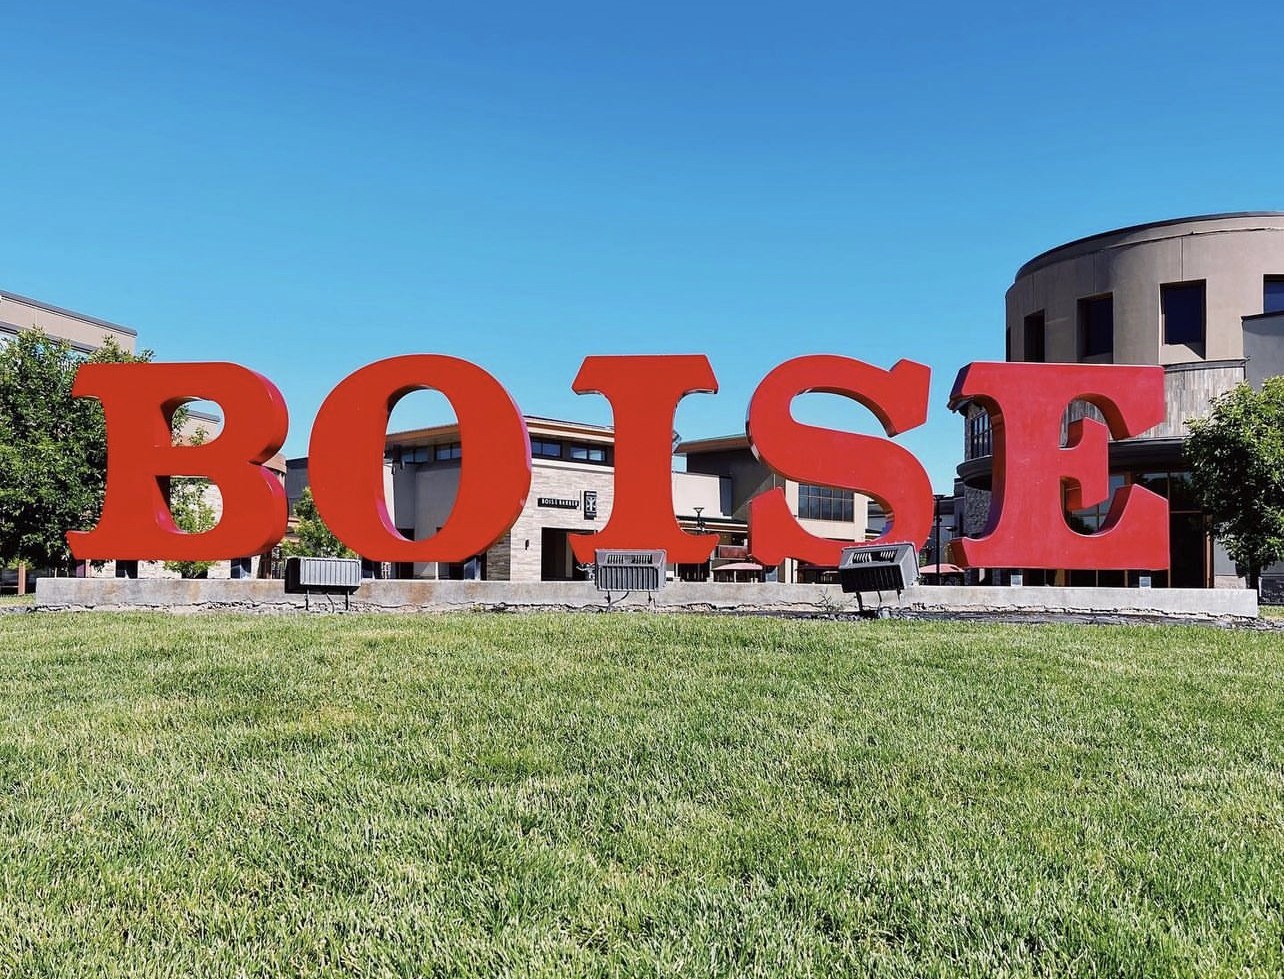 A large outdoor piece of art that says "BOISE".